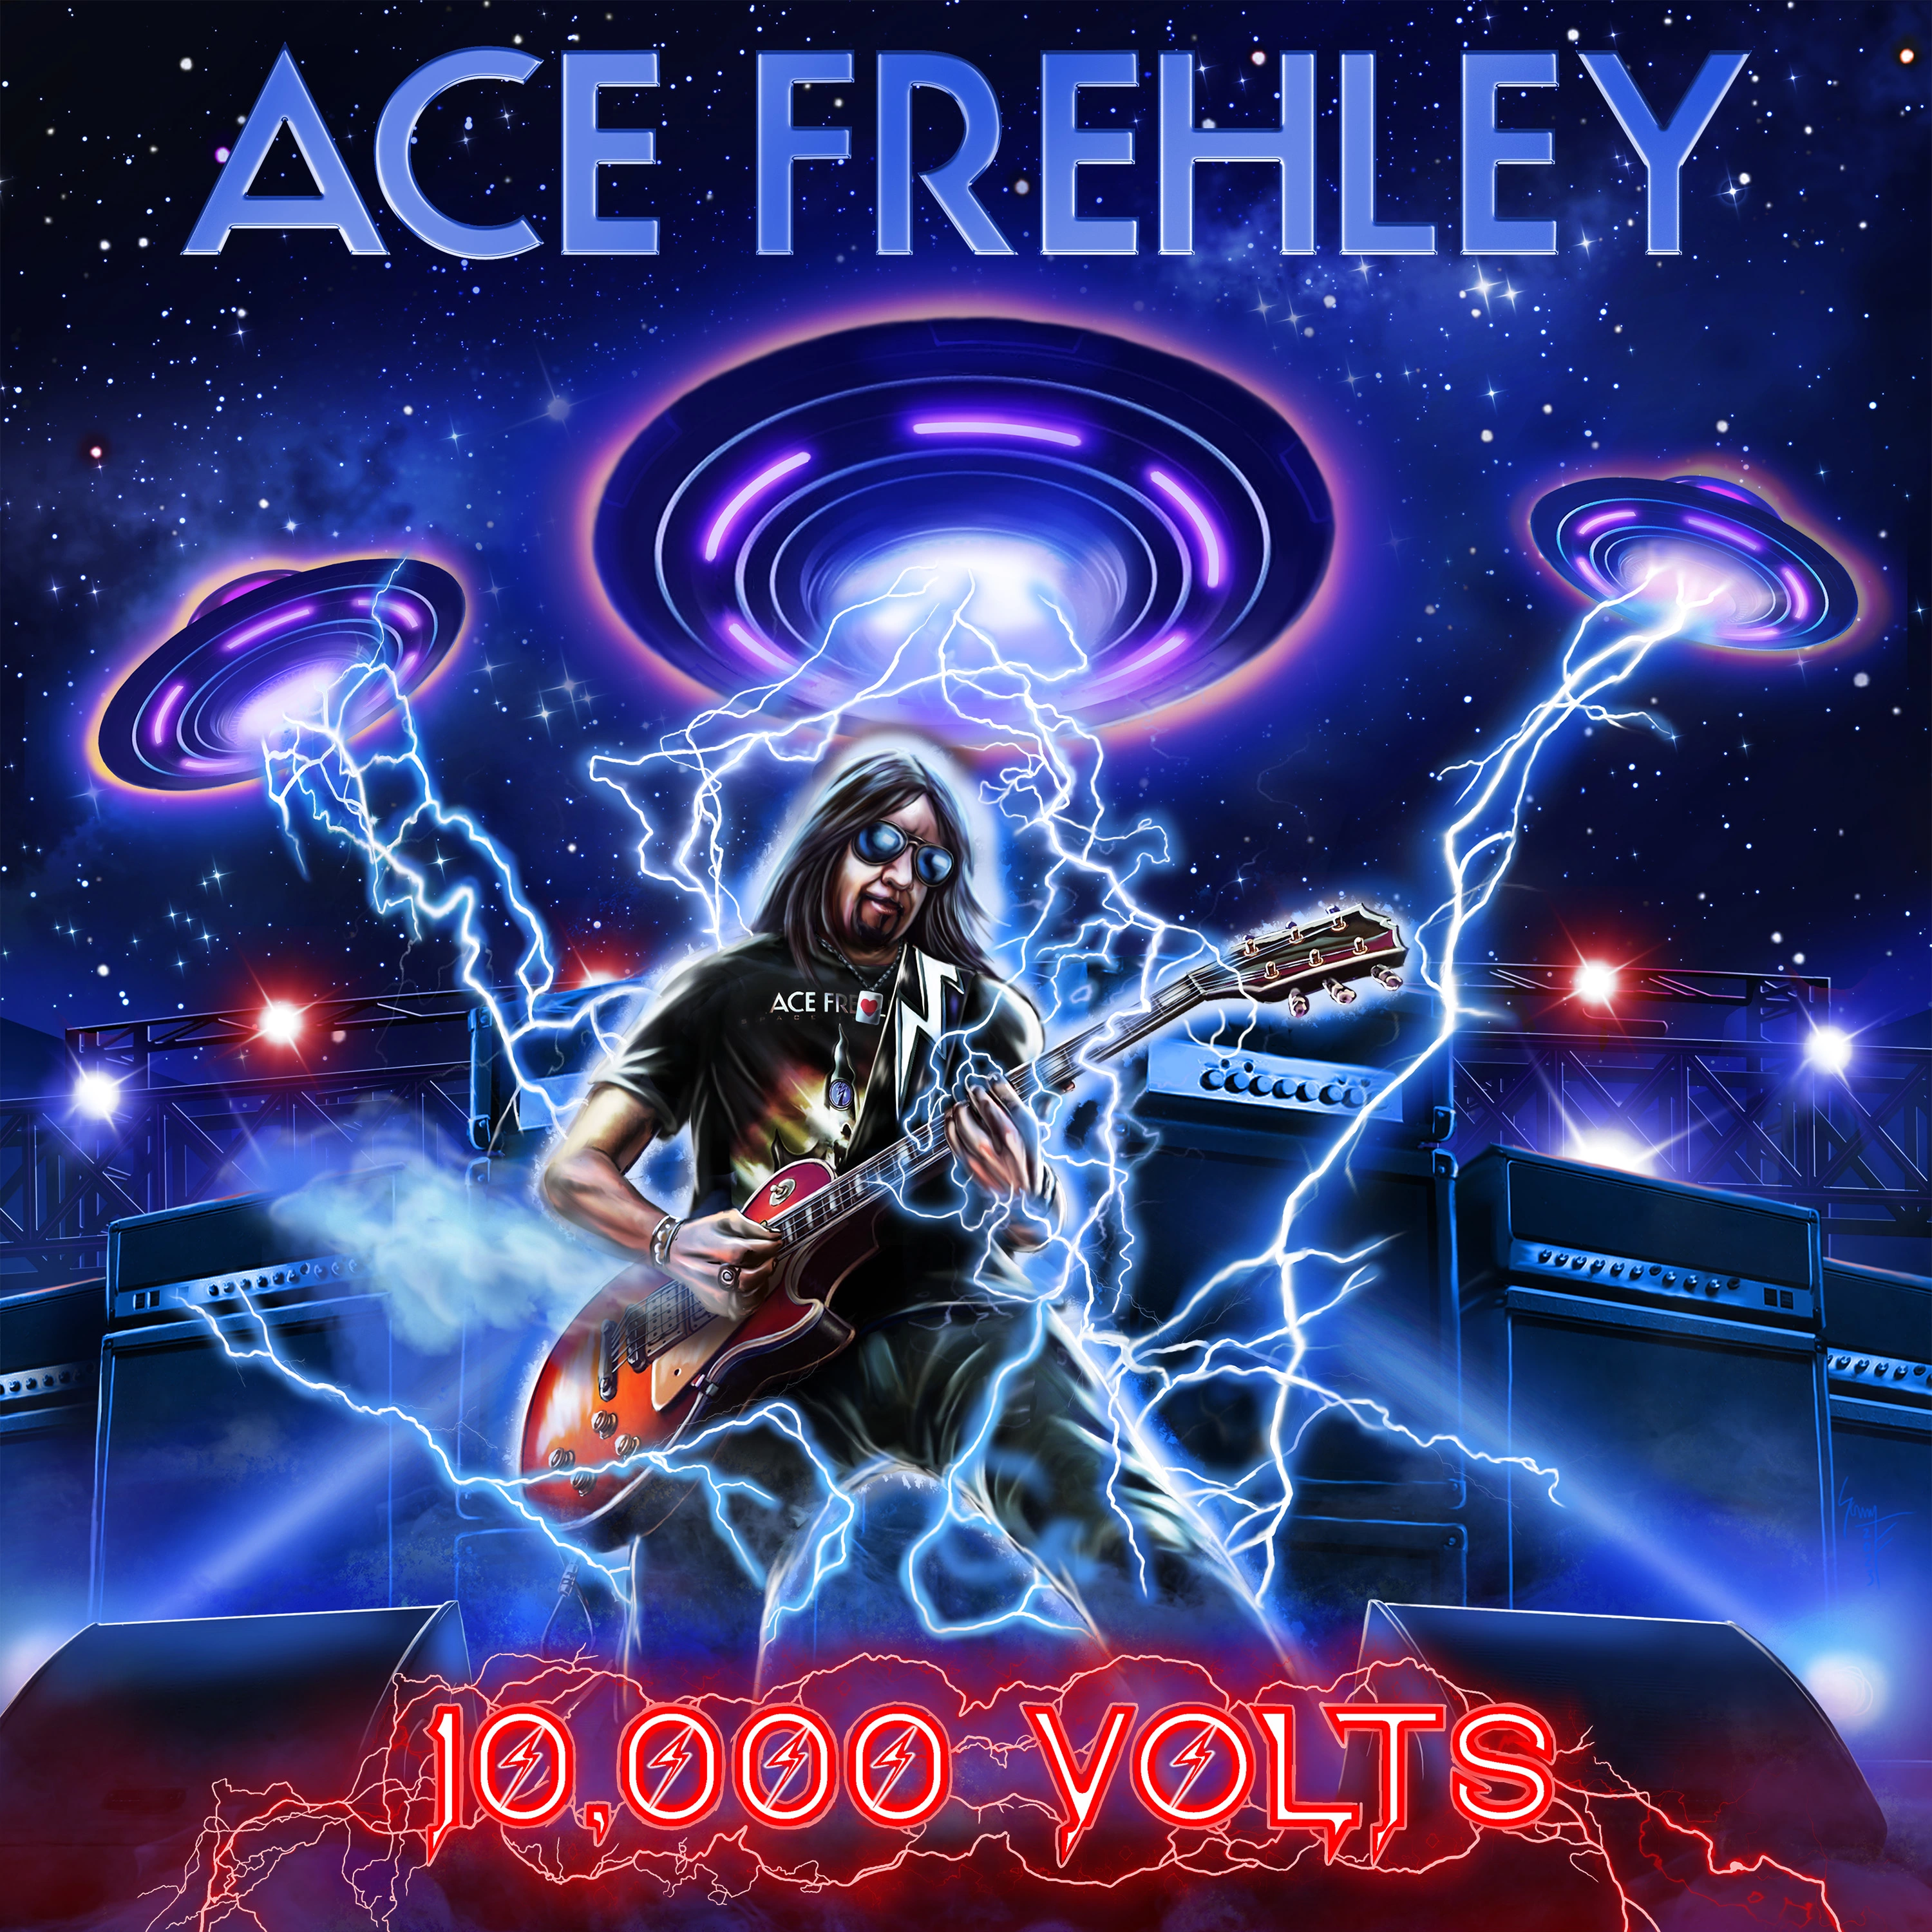 ACE FREHLEY - 10.000 Volts [CD]